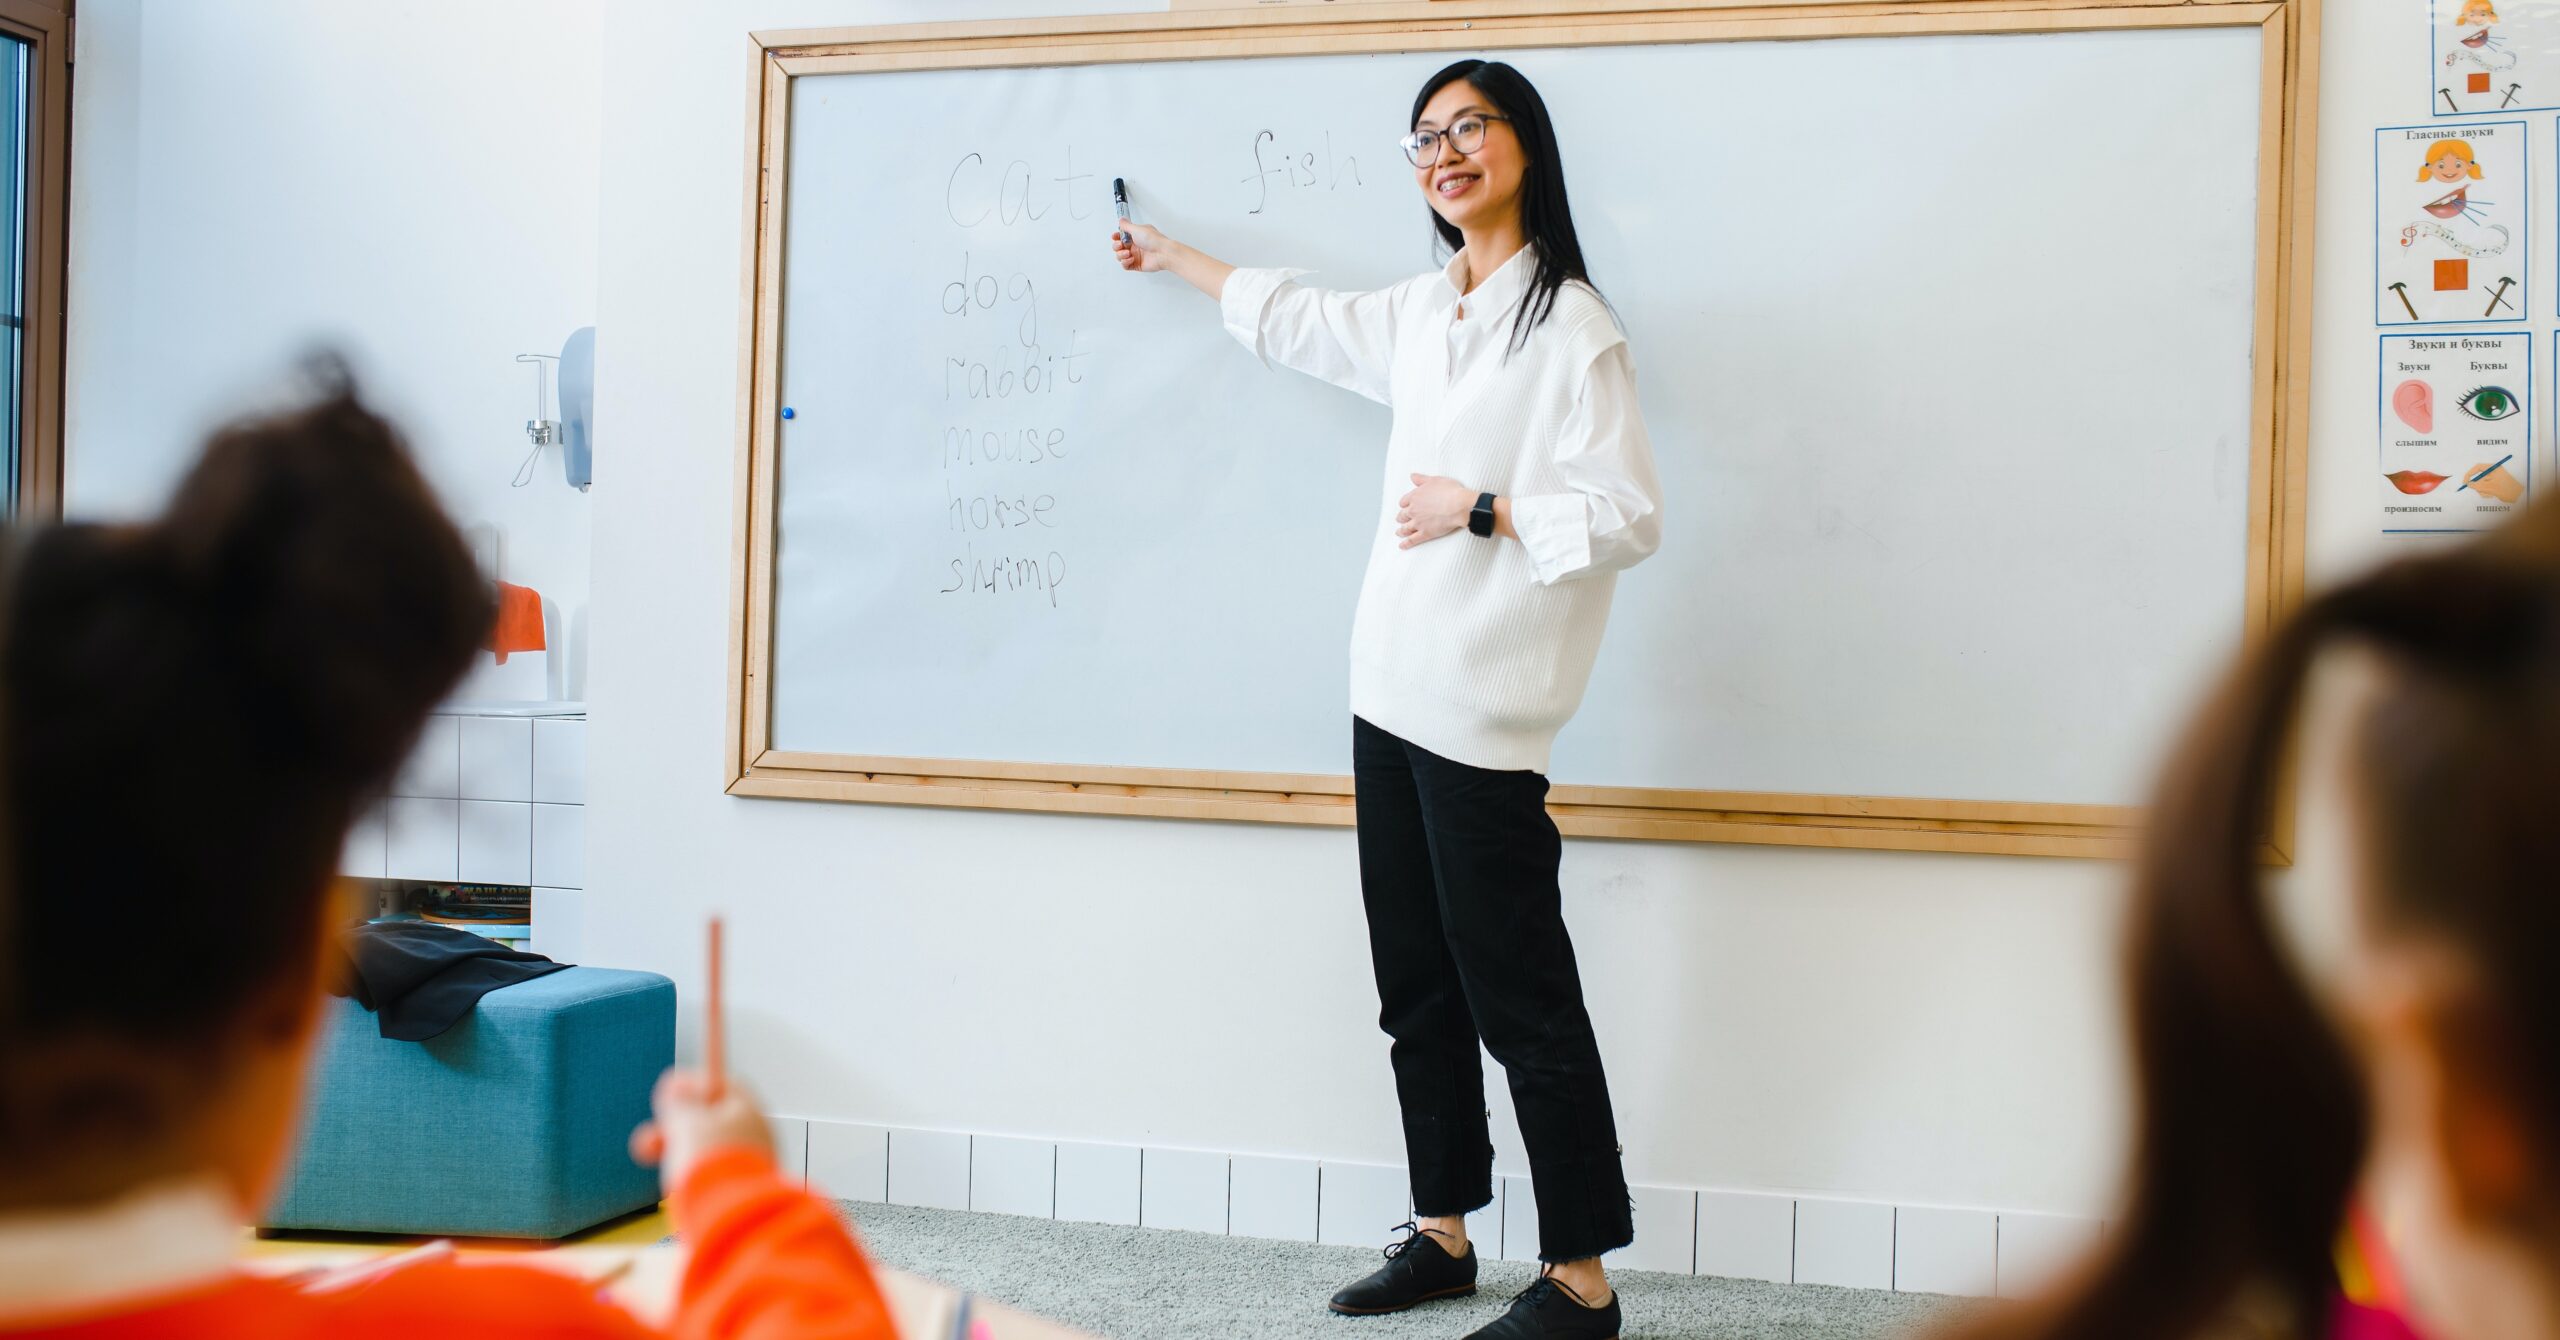 <p>If you enroll in a teacher residency program in California, not only will you be able to earn your MAT in a year and gain invaluable teaching experience, you’ll help address the state’s teacher shortage.</p>